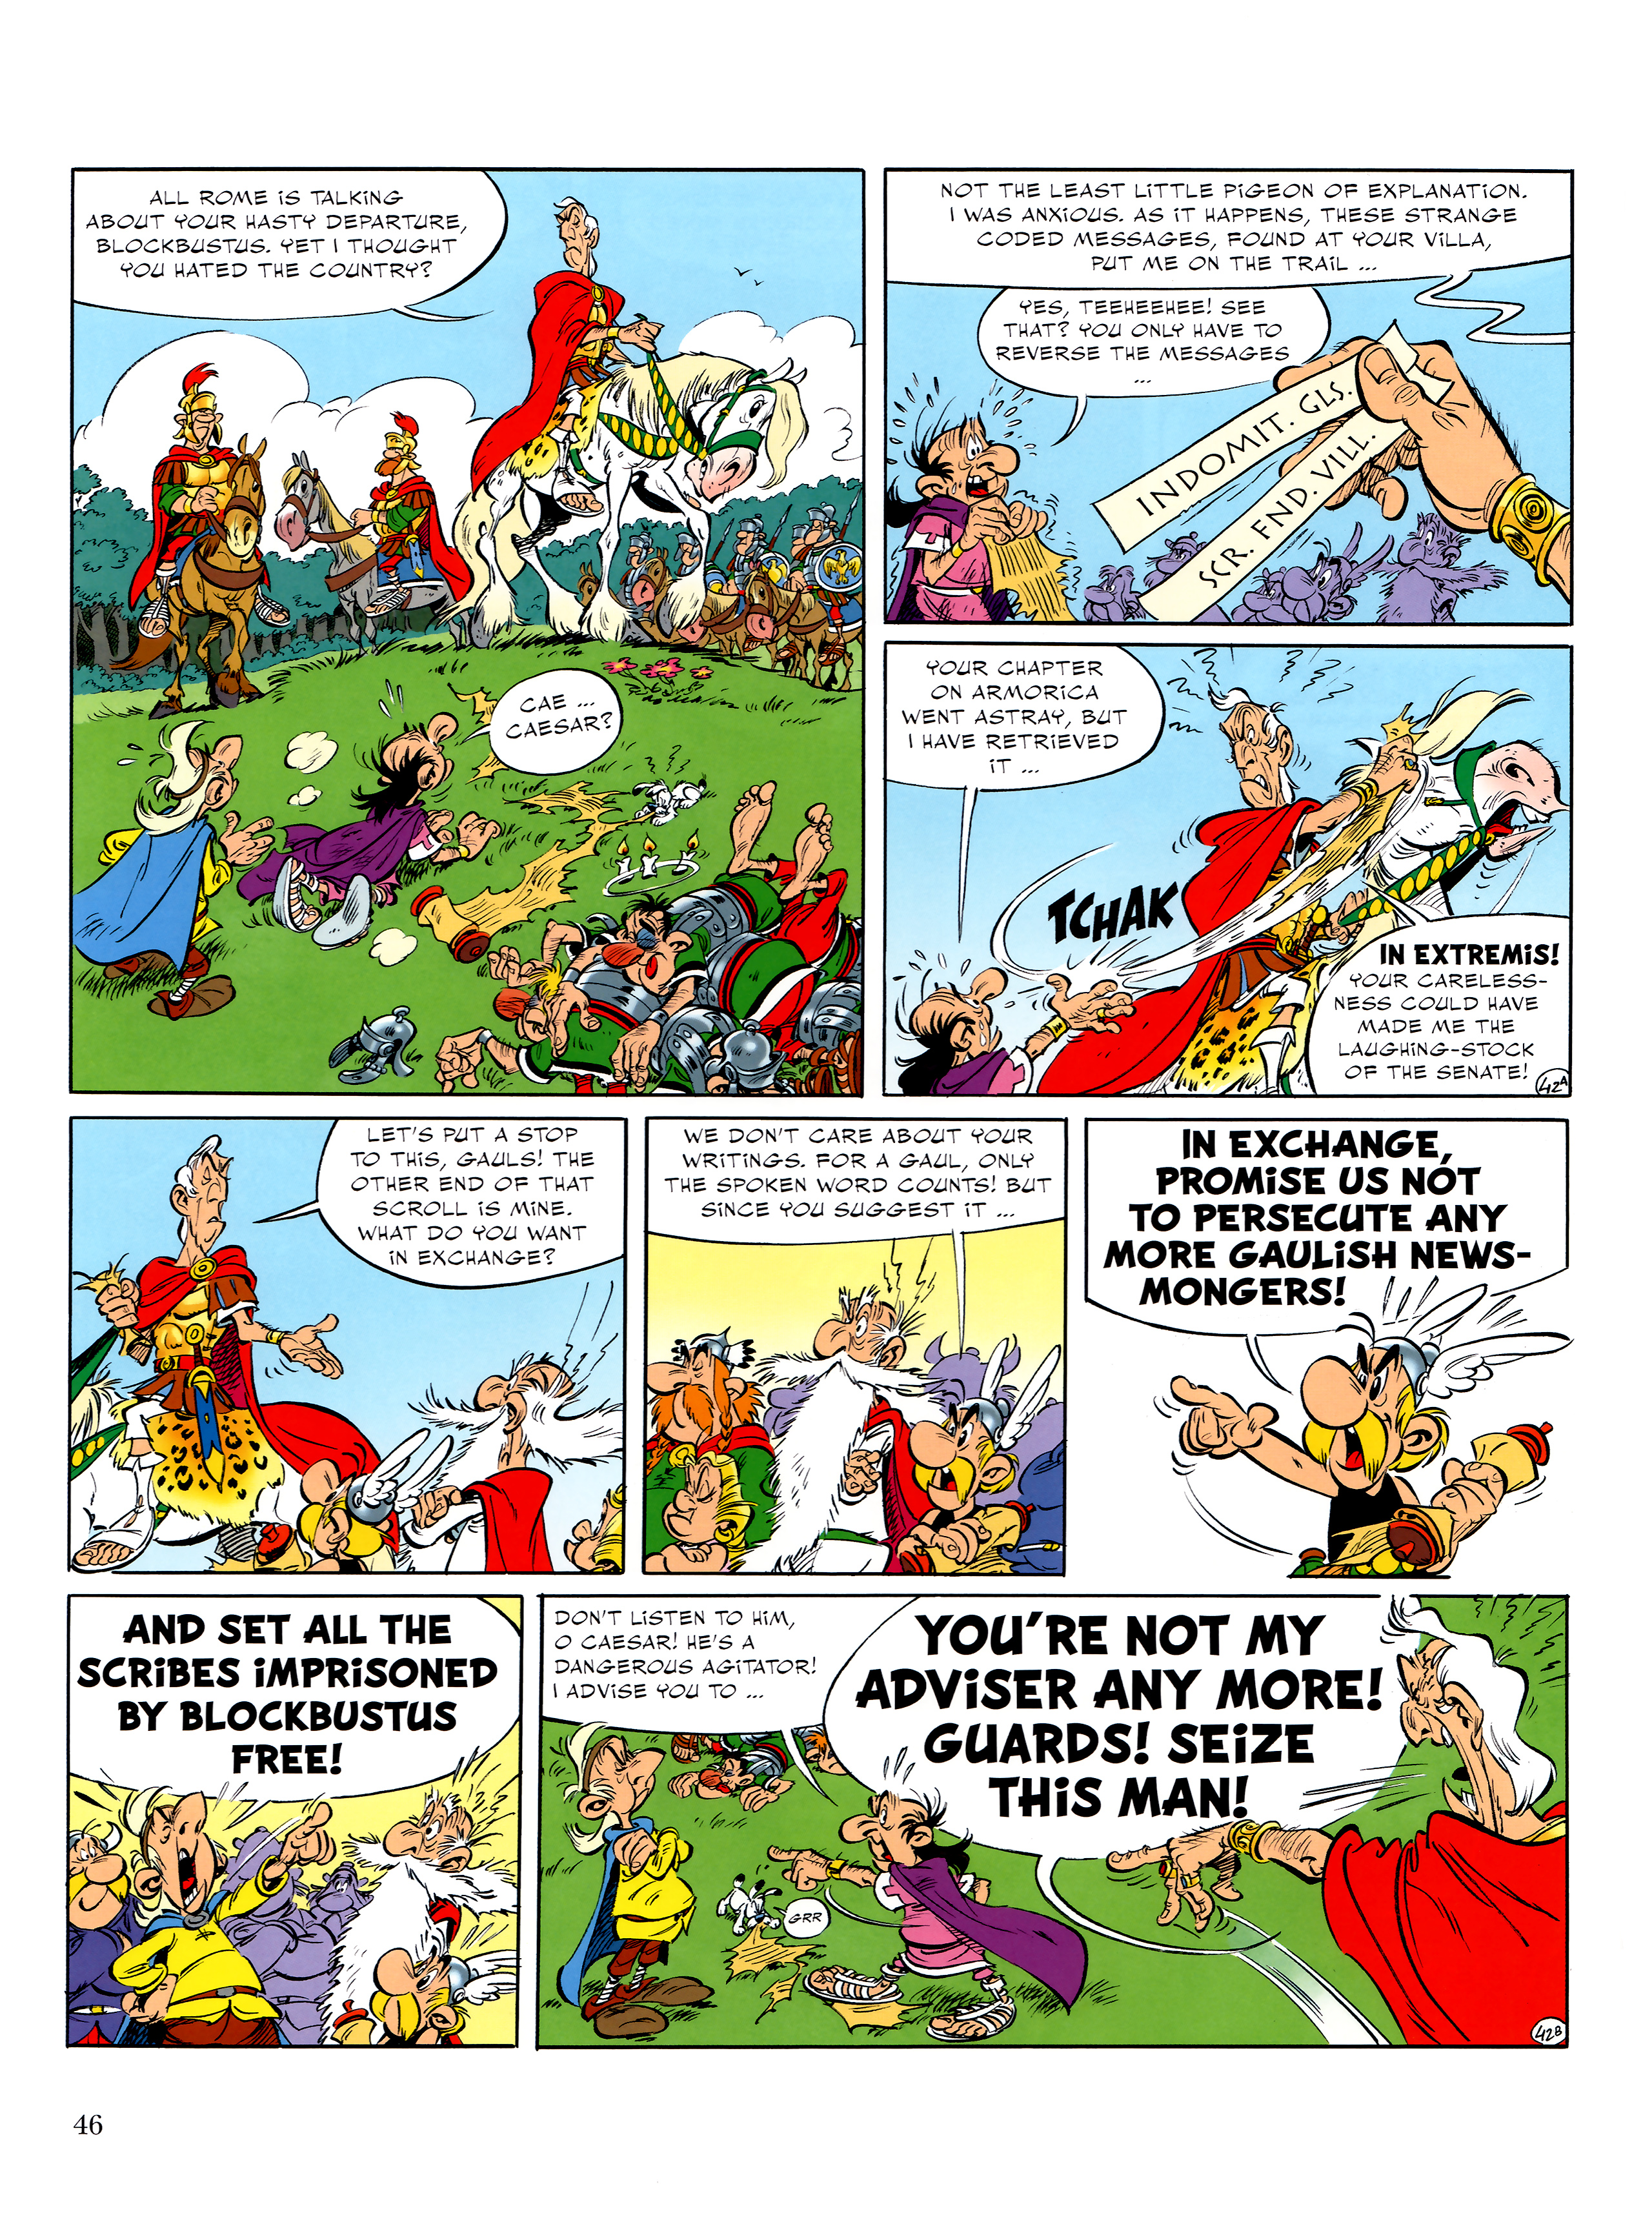 Read online Asterix comic -  Issue #36 - 47